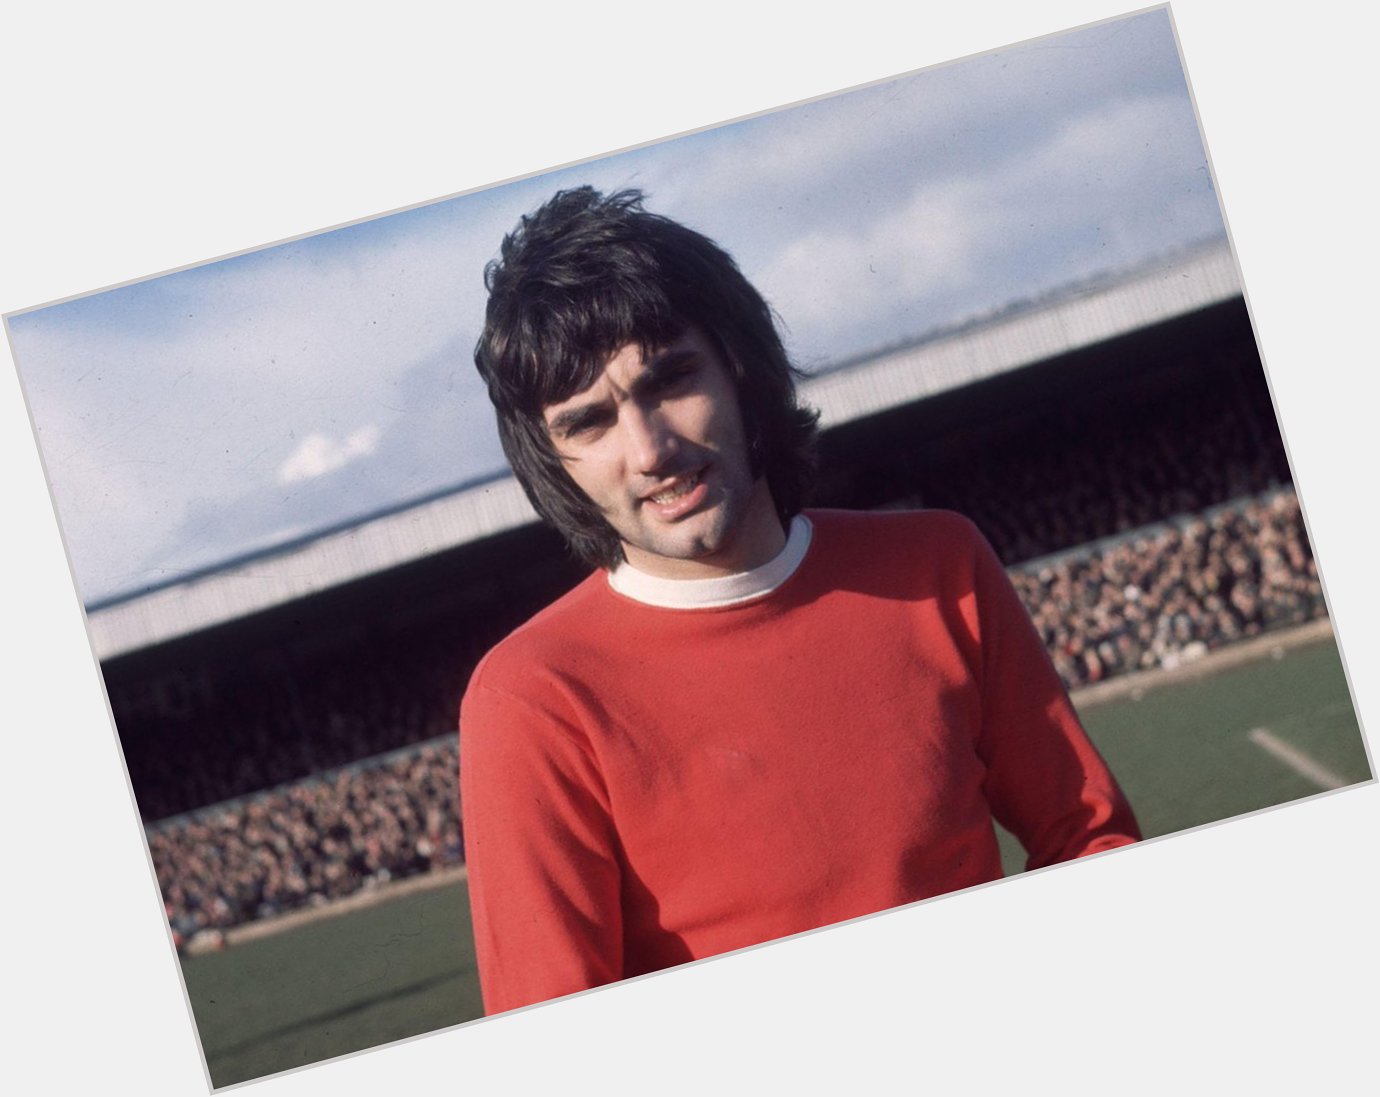 Happy Birthday to George Best! What a player he was for Manchester United! 